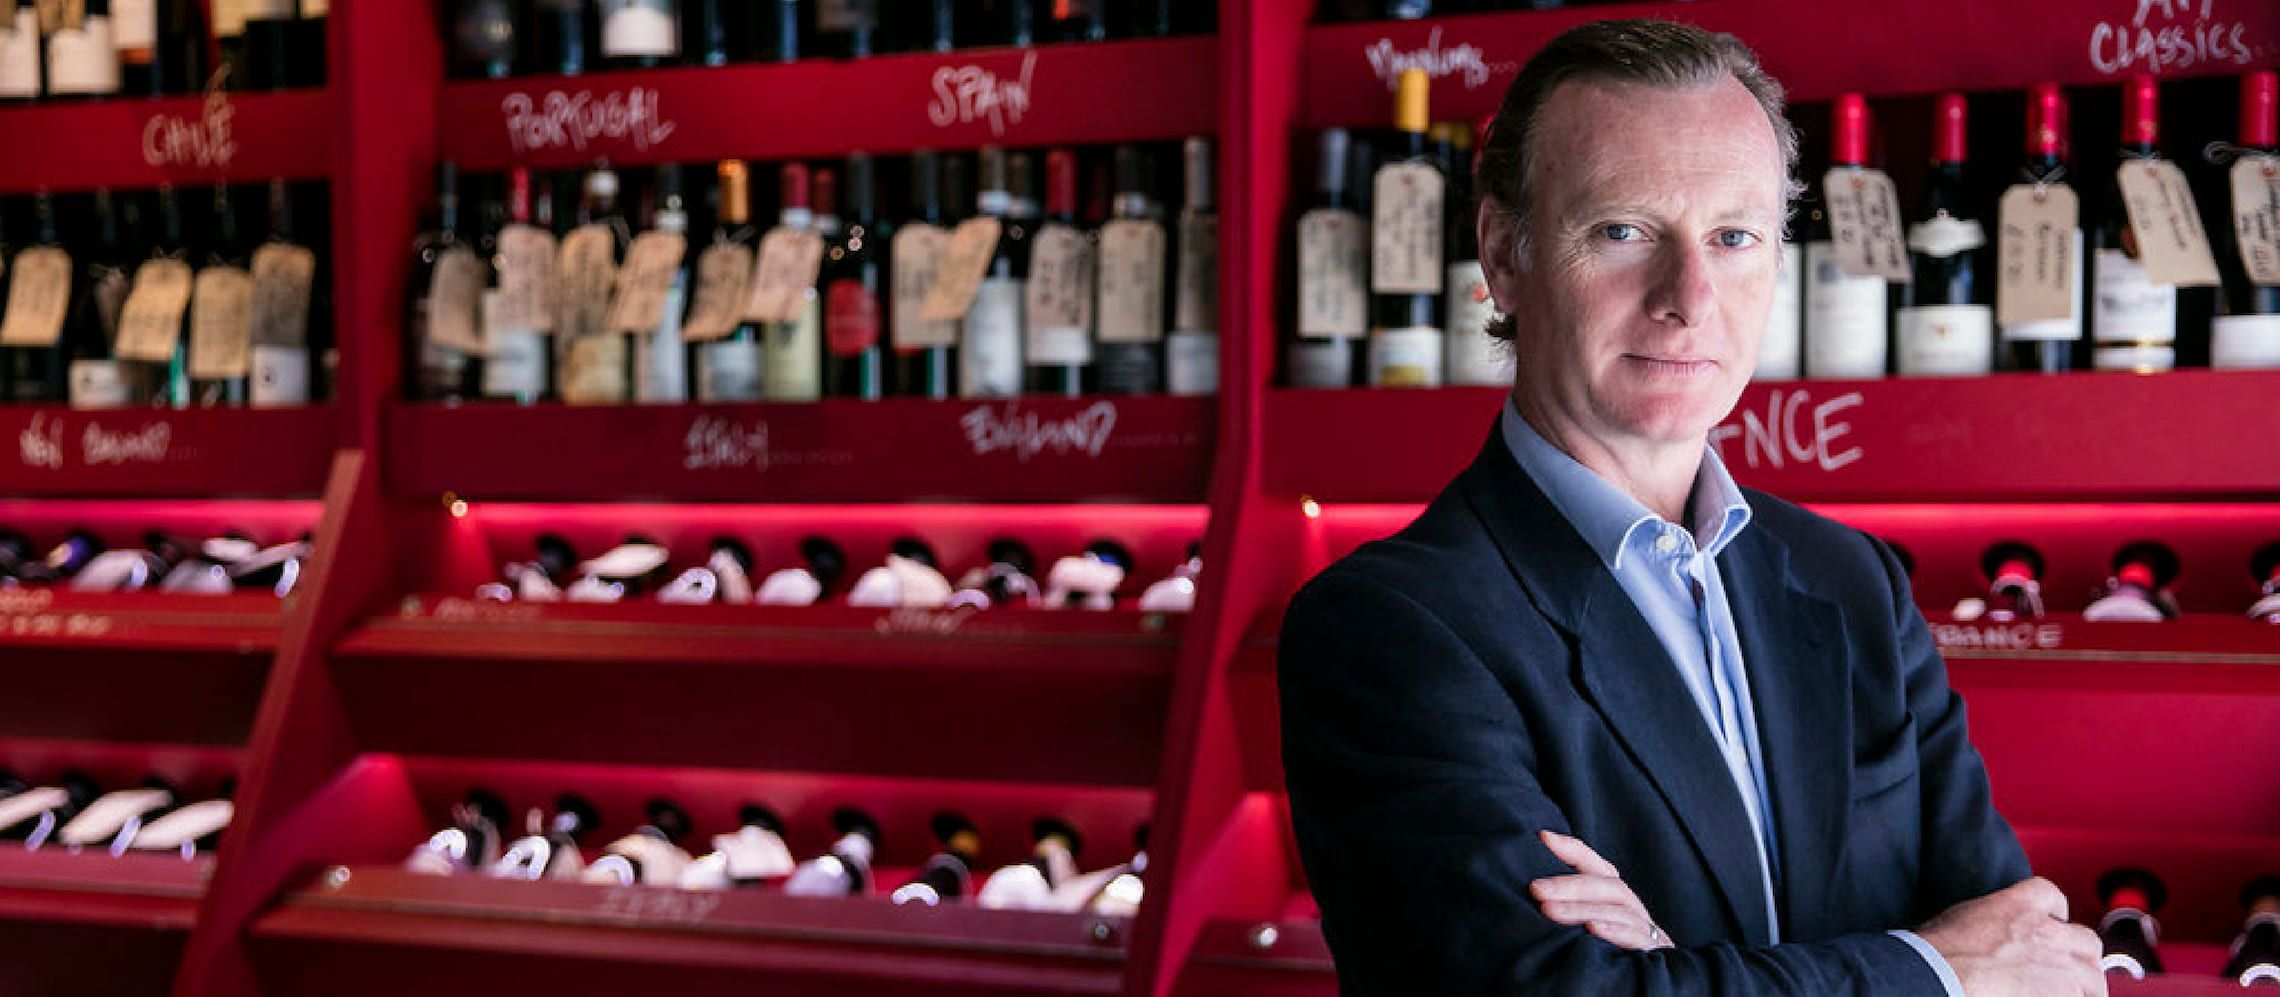 Photo for: James Davy - About his Wine Bar on its new Venue in London